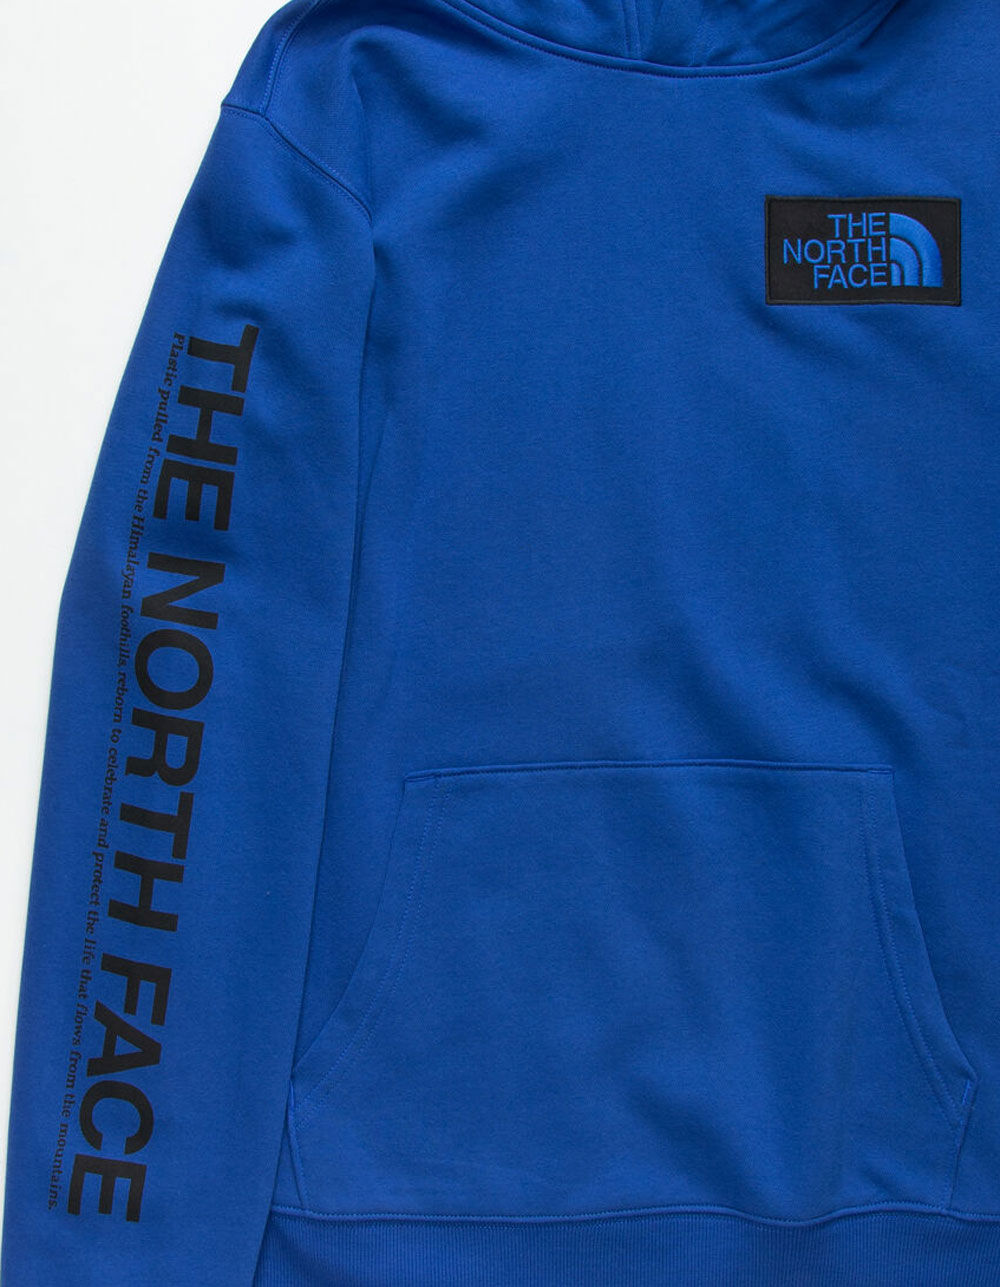 THE NORTH FACE Himalayan Source Mens Hoodie - BLUE | Tillys